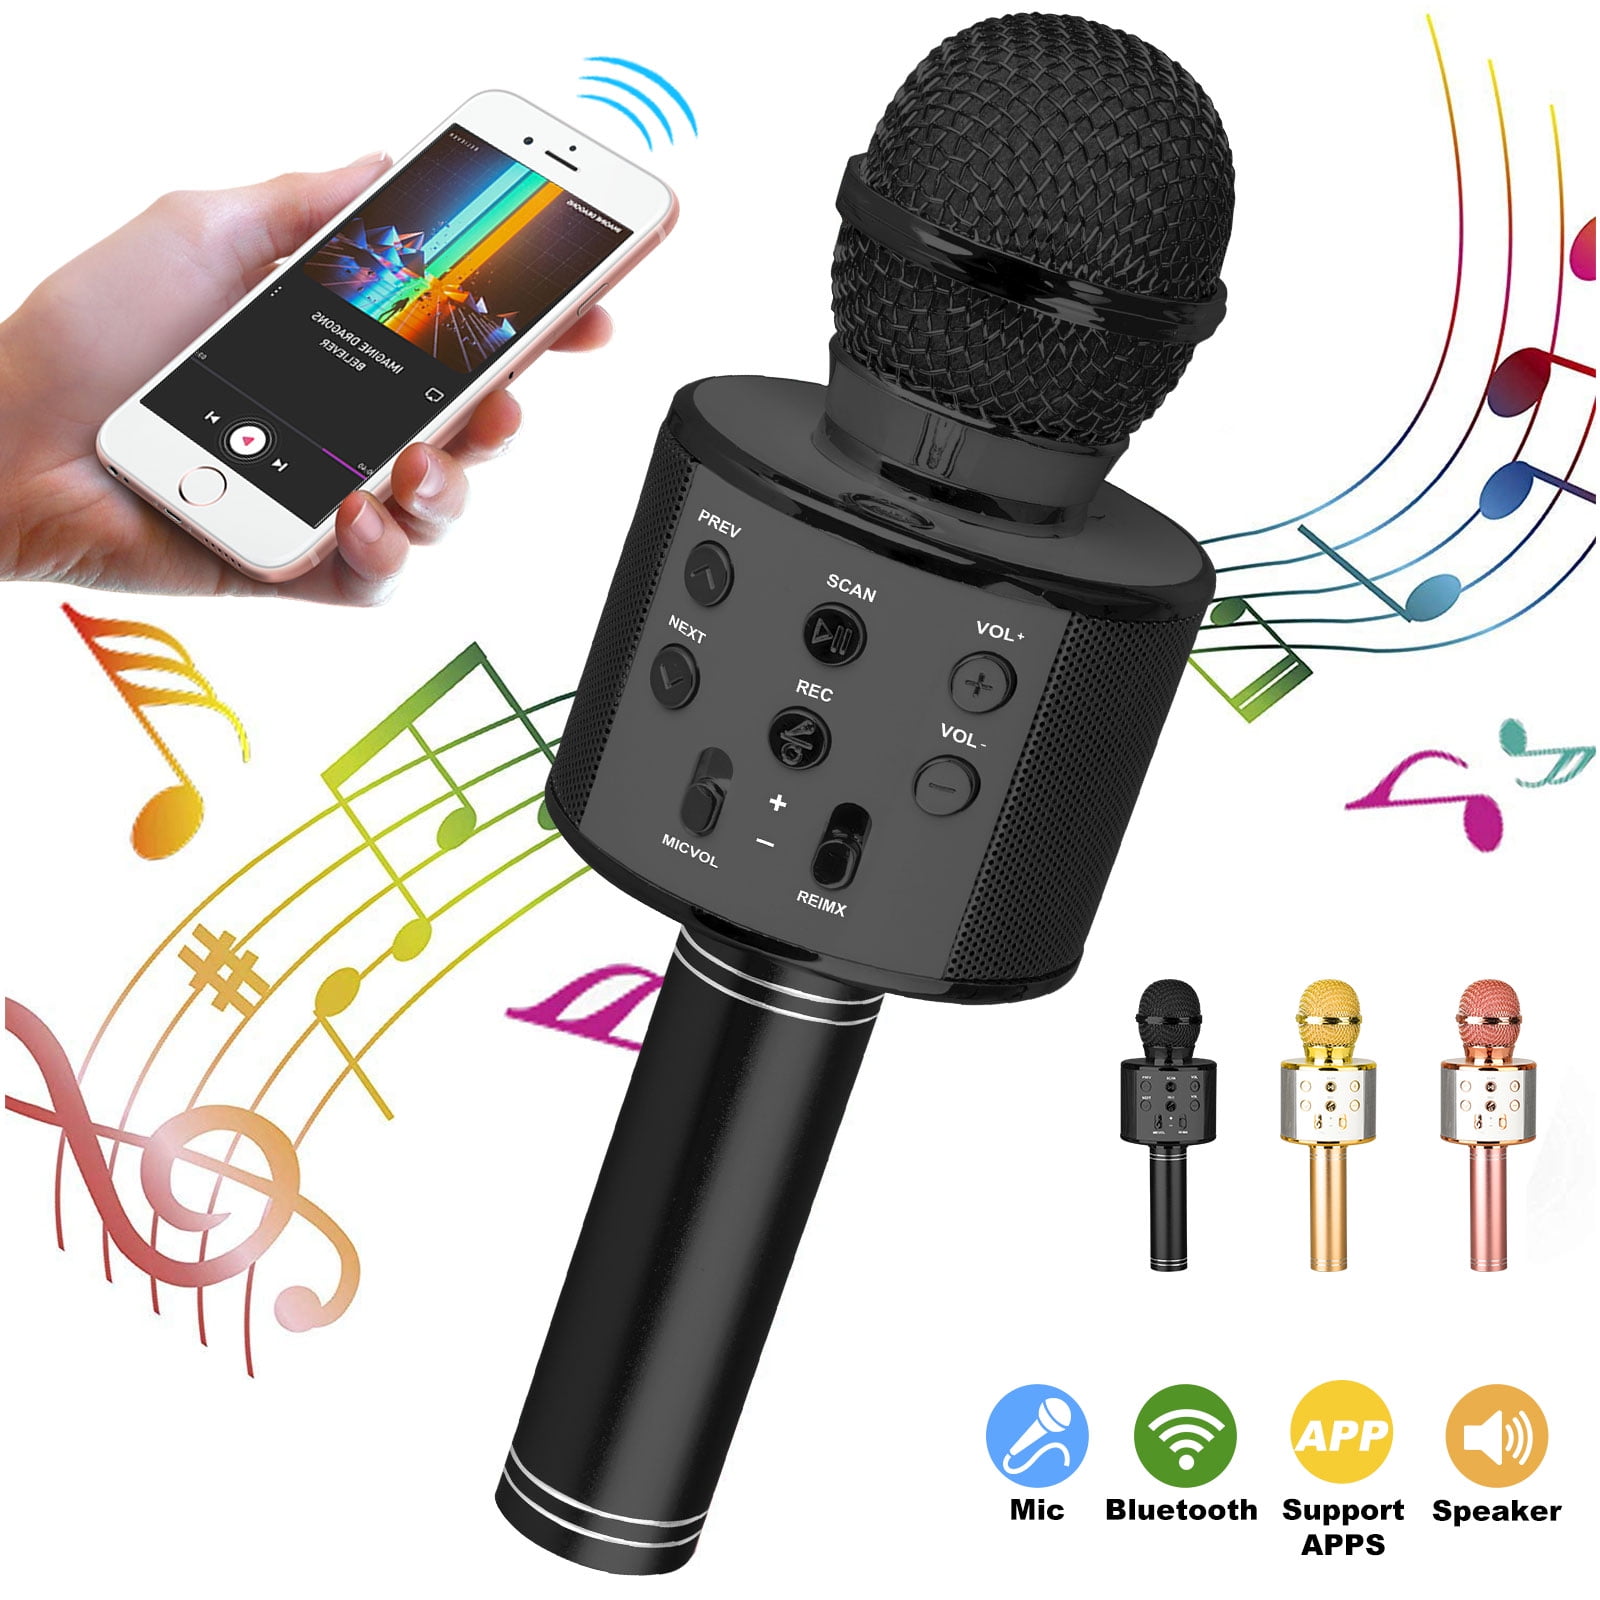 BQTYBD Wireless Bluetooth Karaoke Microphone for Kids,2021 Portable Handheld Mic Speaker Machine with LED Lights,Gift Toys for Kids Boys & Girls Adults Birthday Christmas Home KTV 